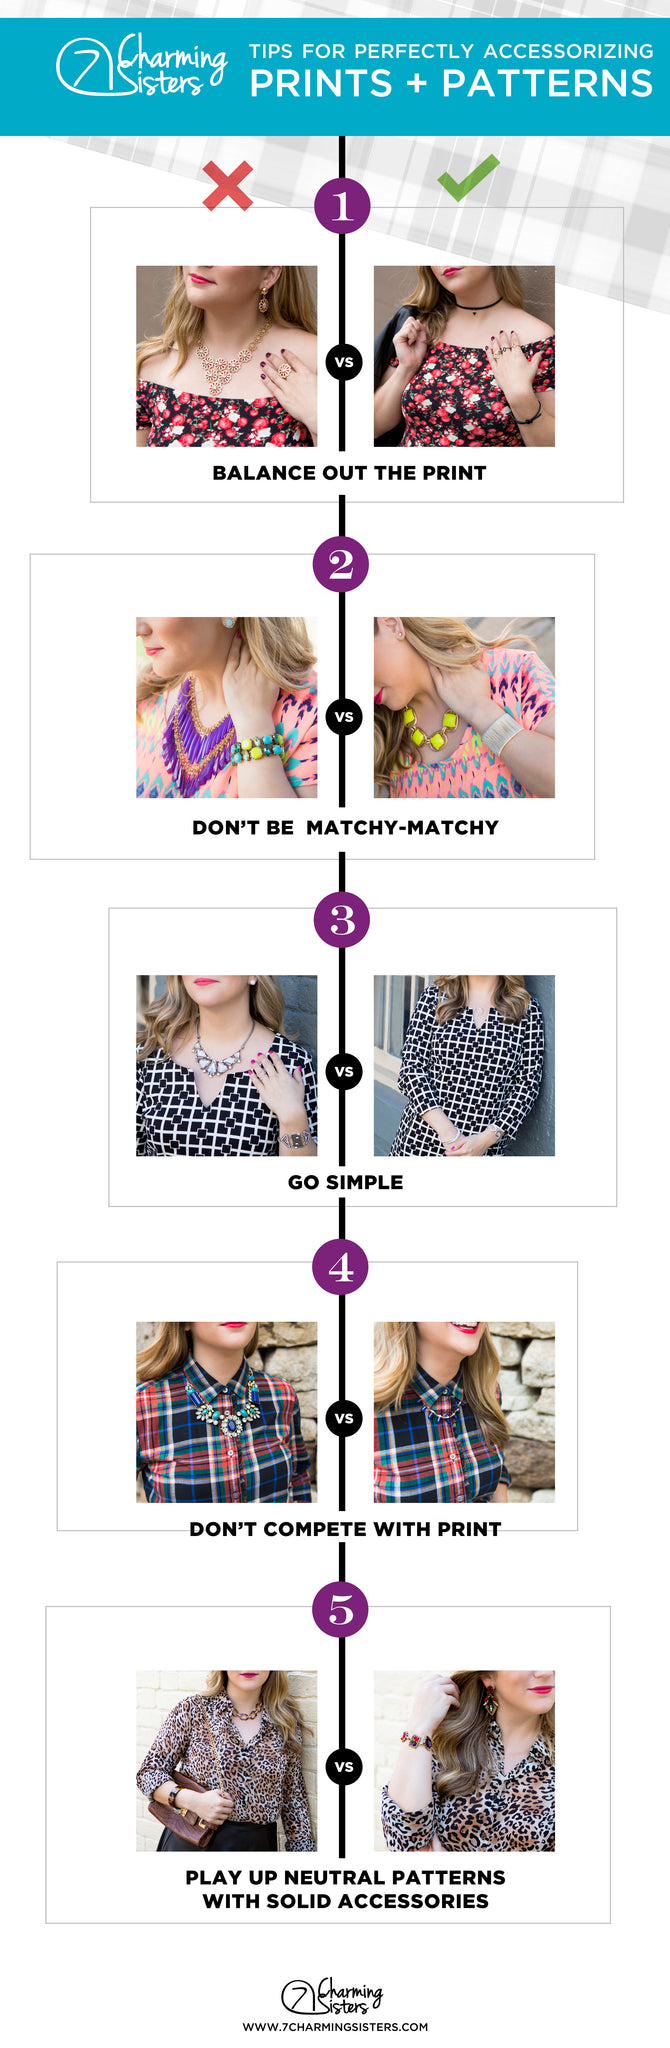 Easy Tips for Mixing Prints - 7 Charming Sister